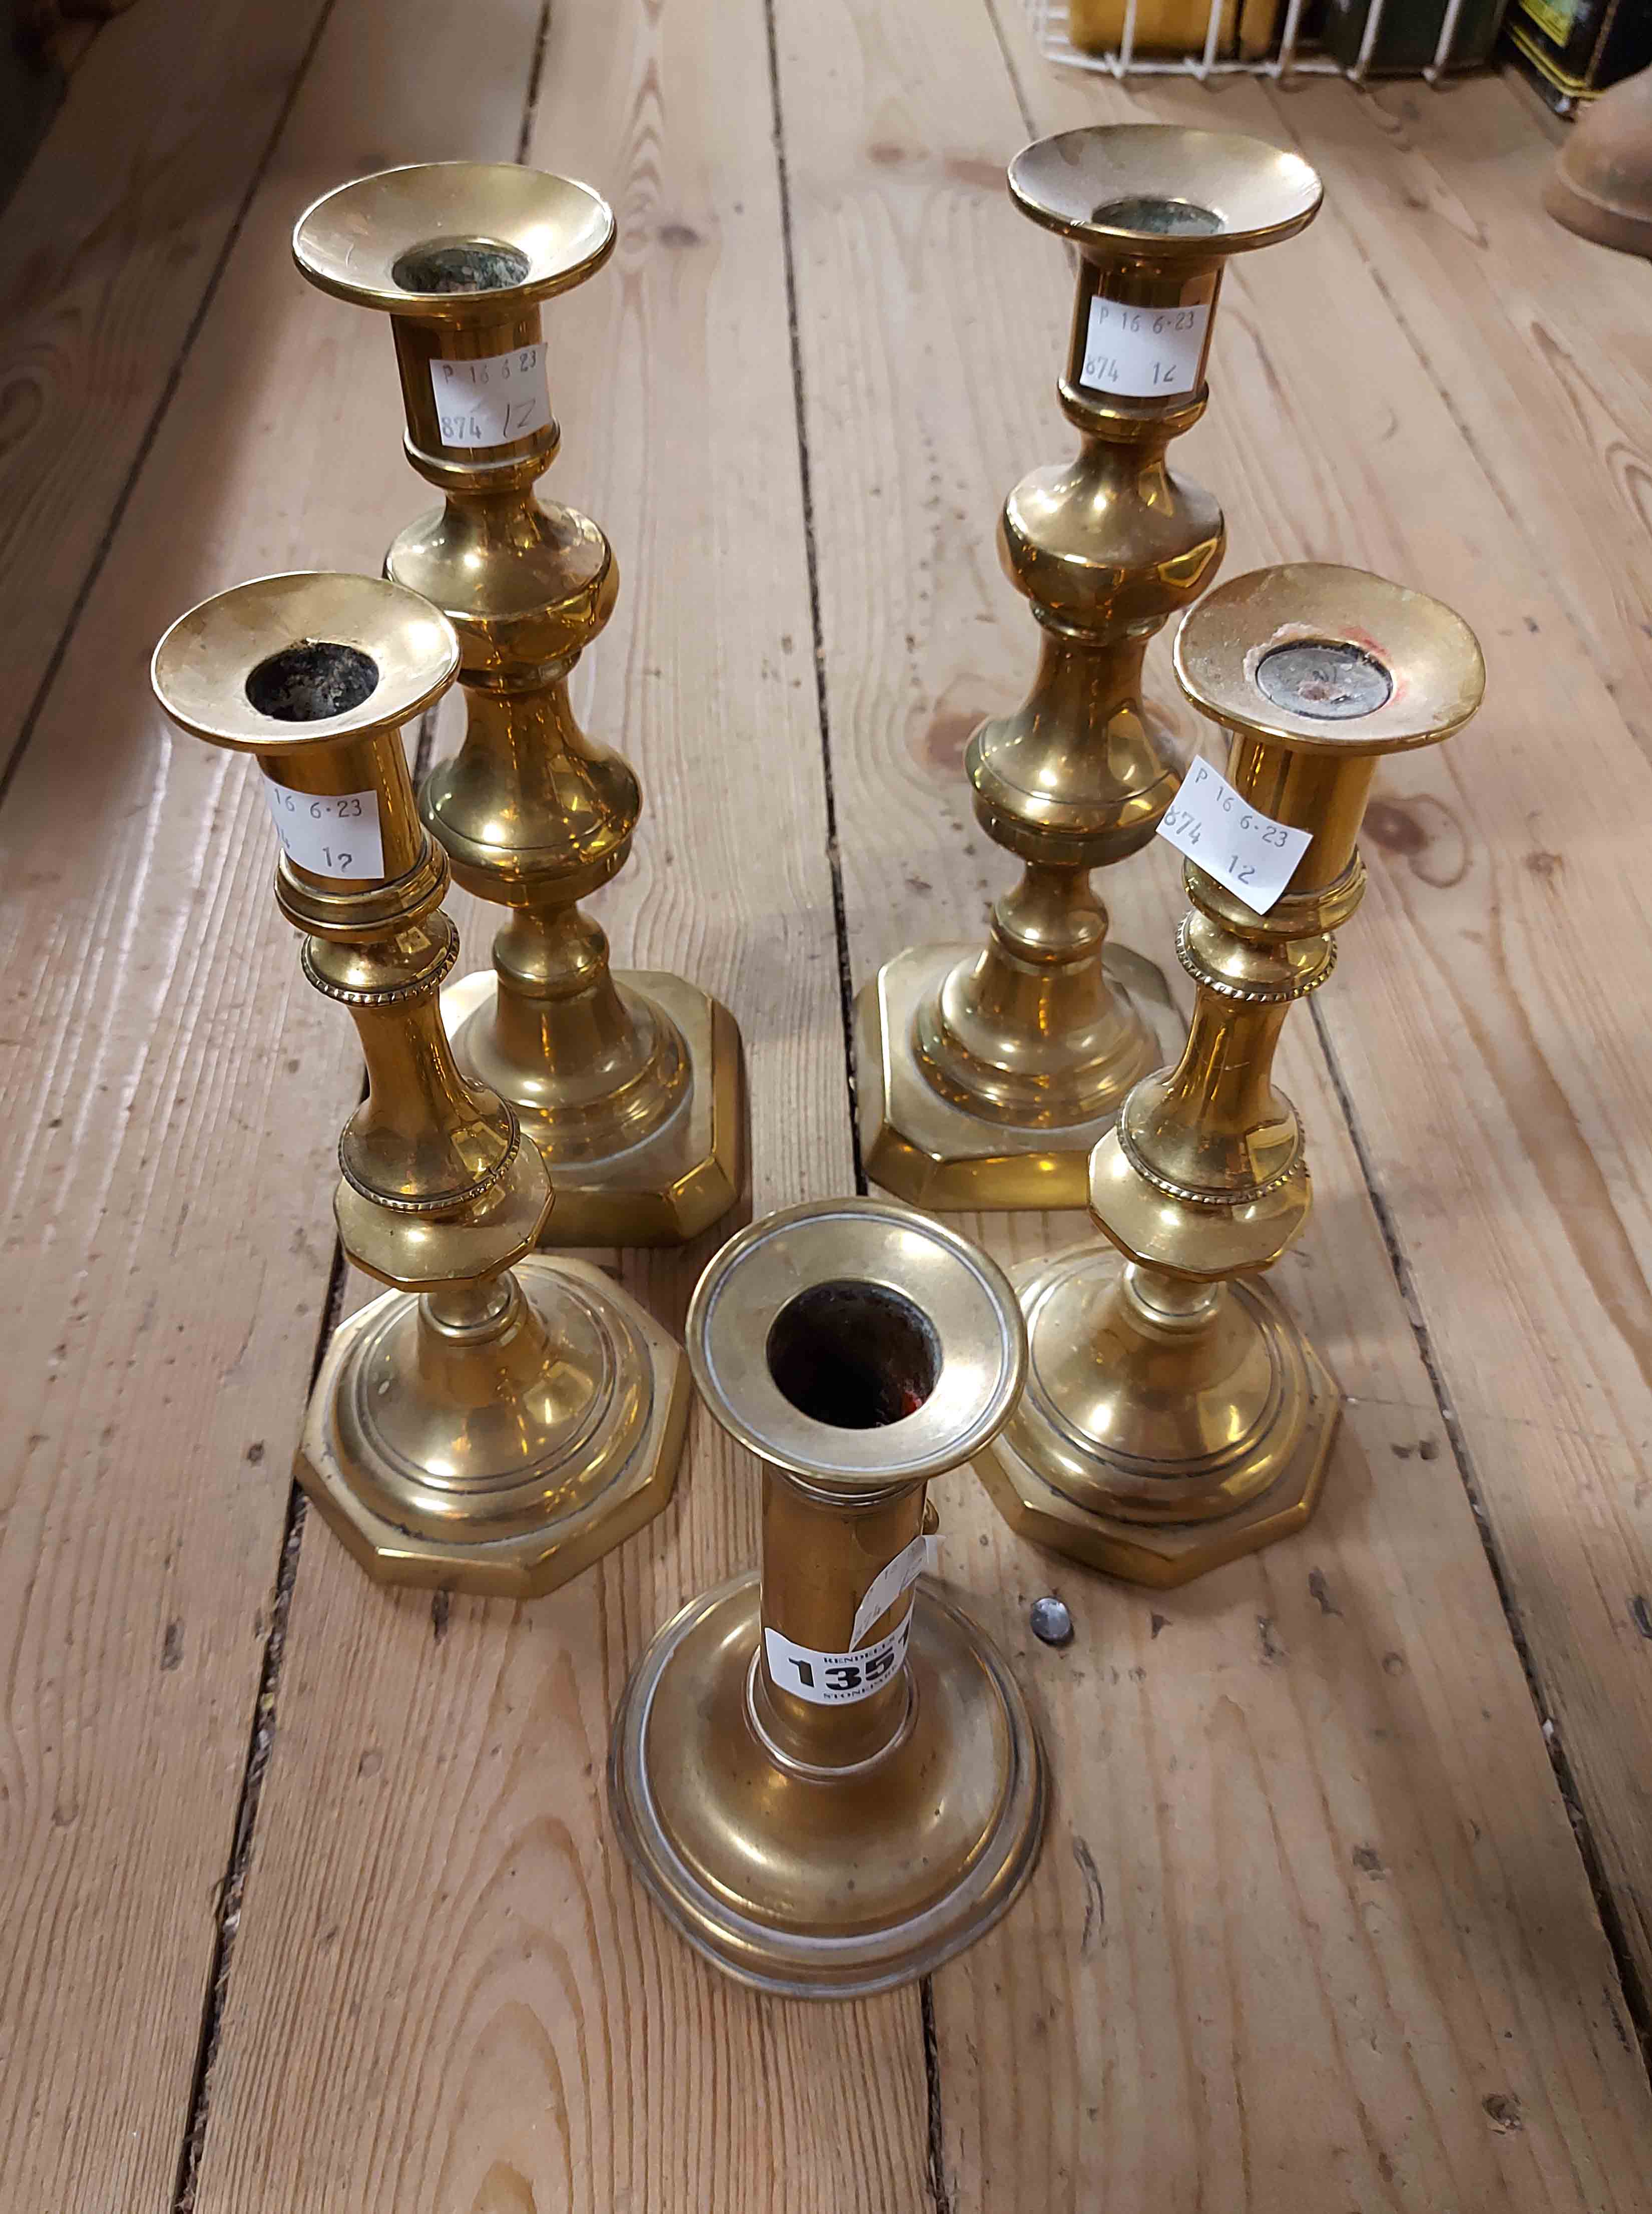 A pair of Victorian brass candlesticks - sold with a smaller similar and a single slide ejector